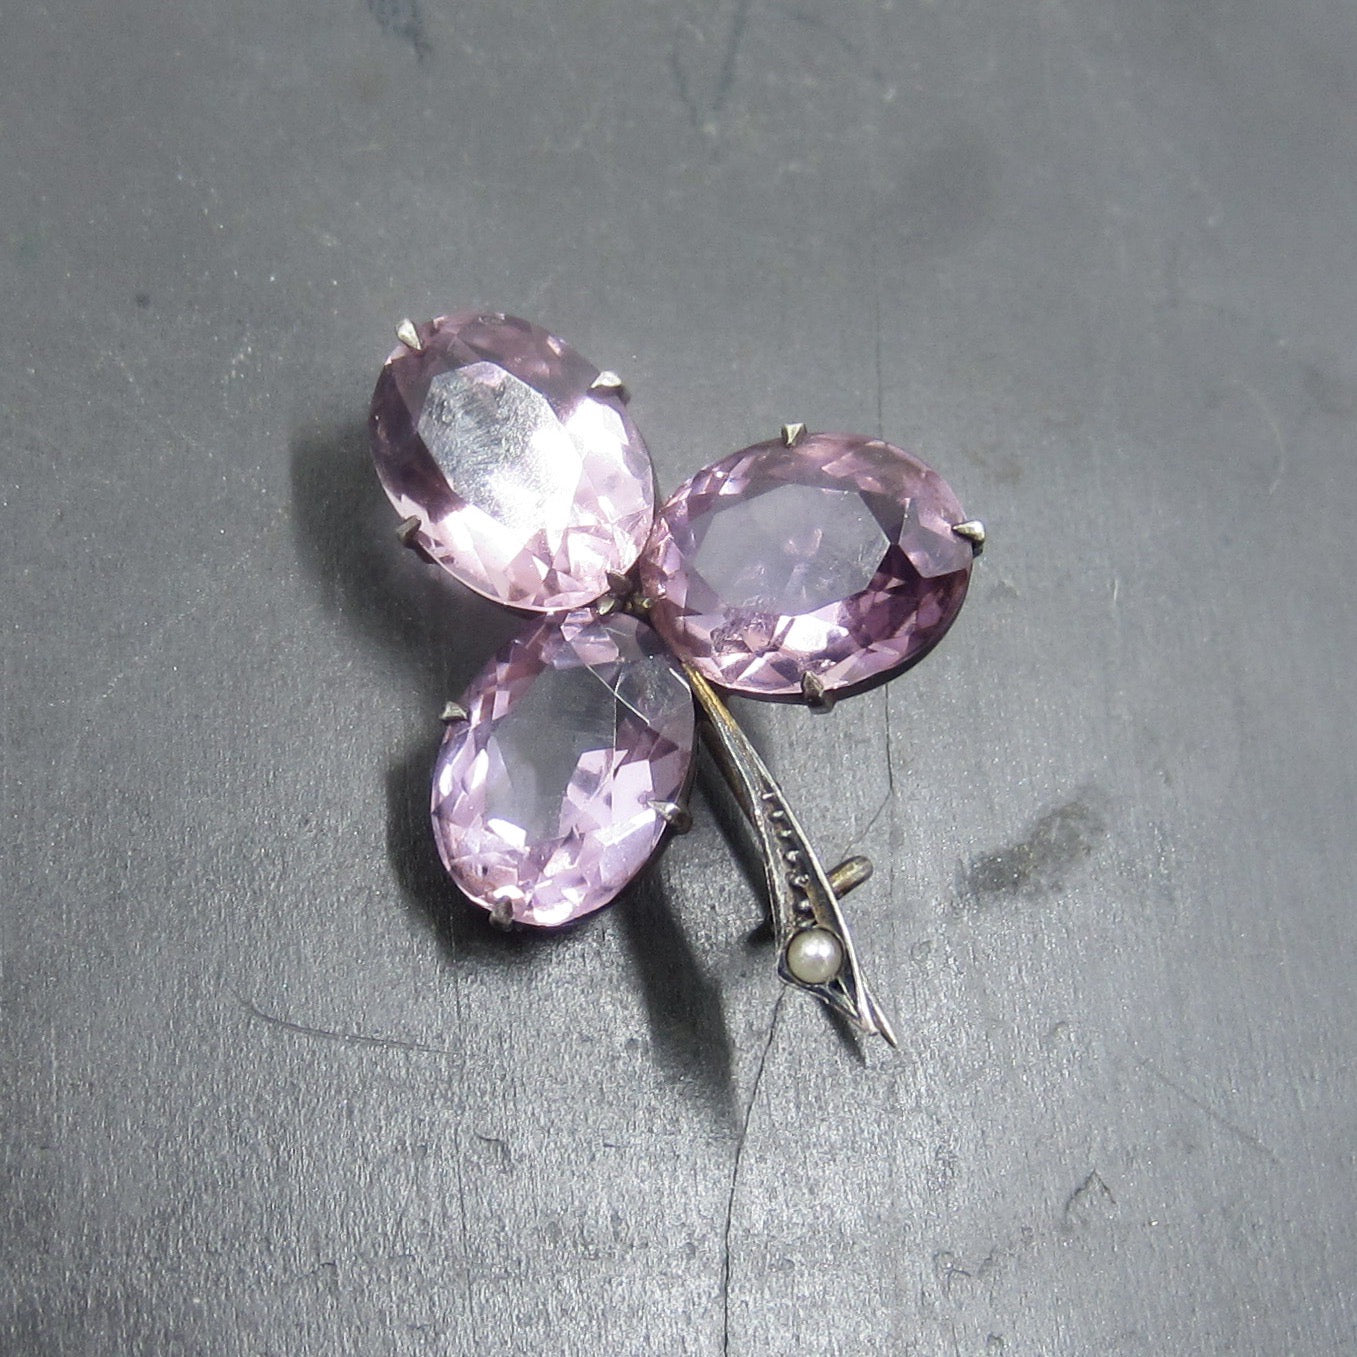 Victorian Amethyst and Pearl Clover Brooch Sterling Silver c. 1890